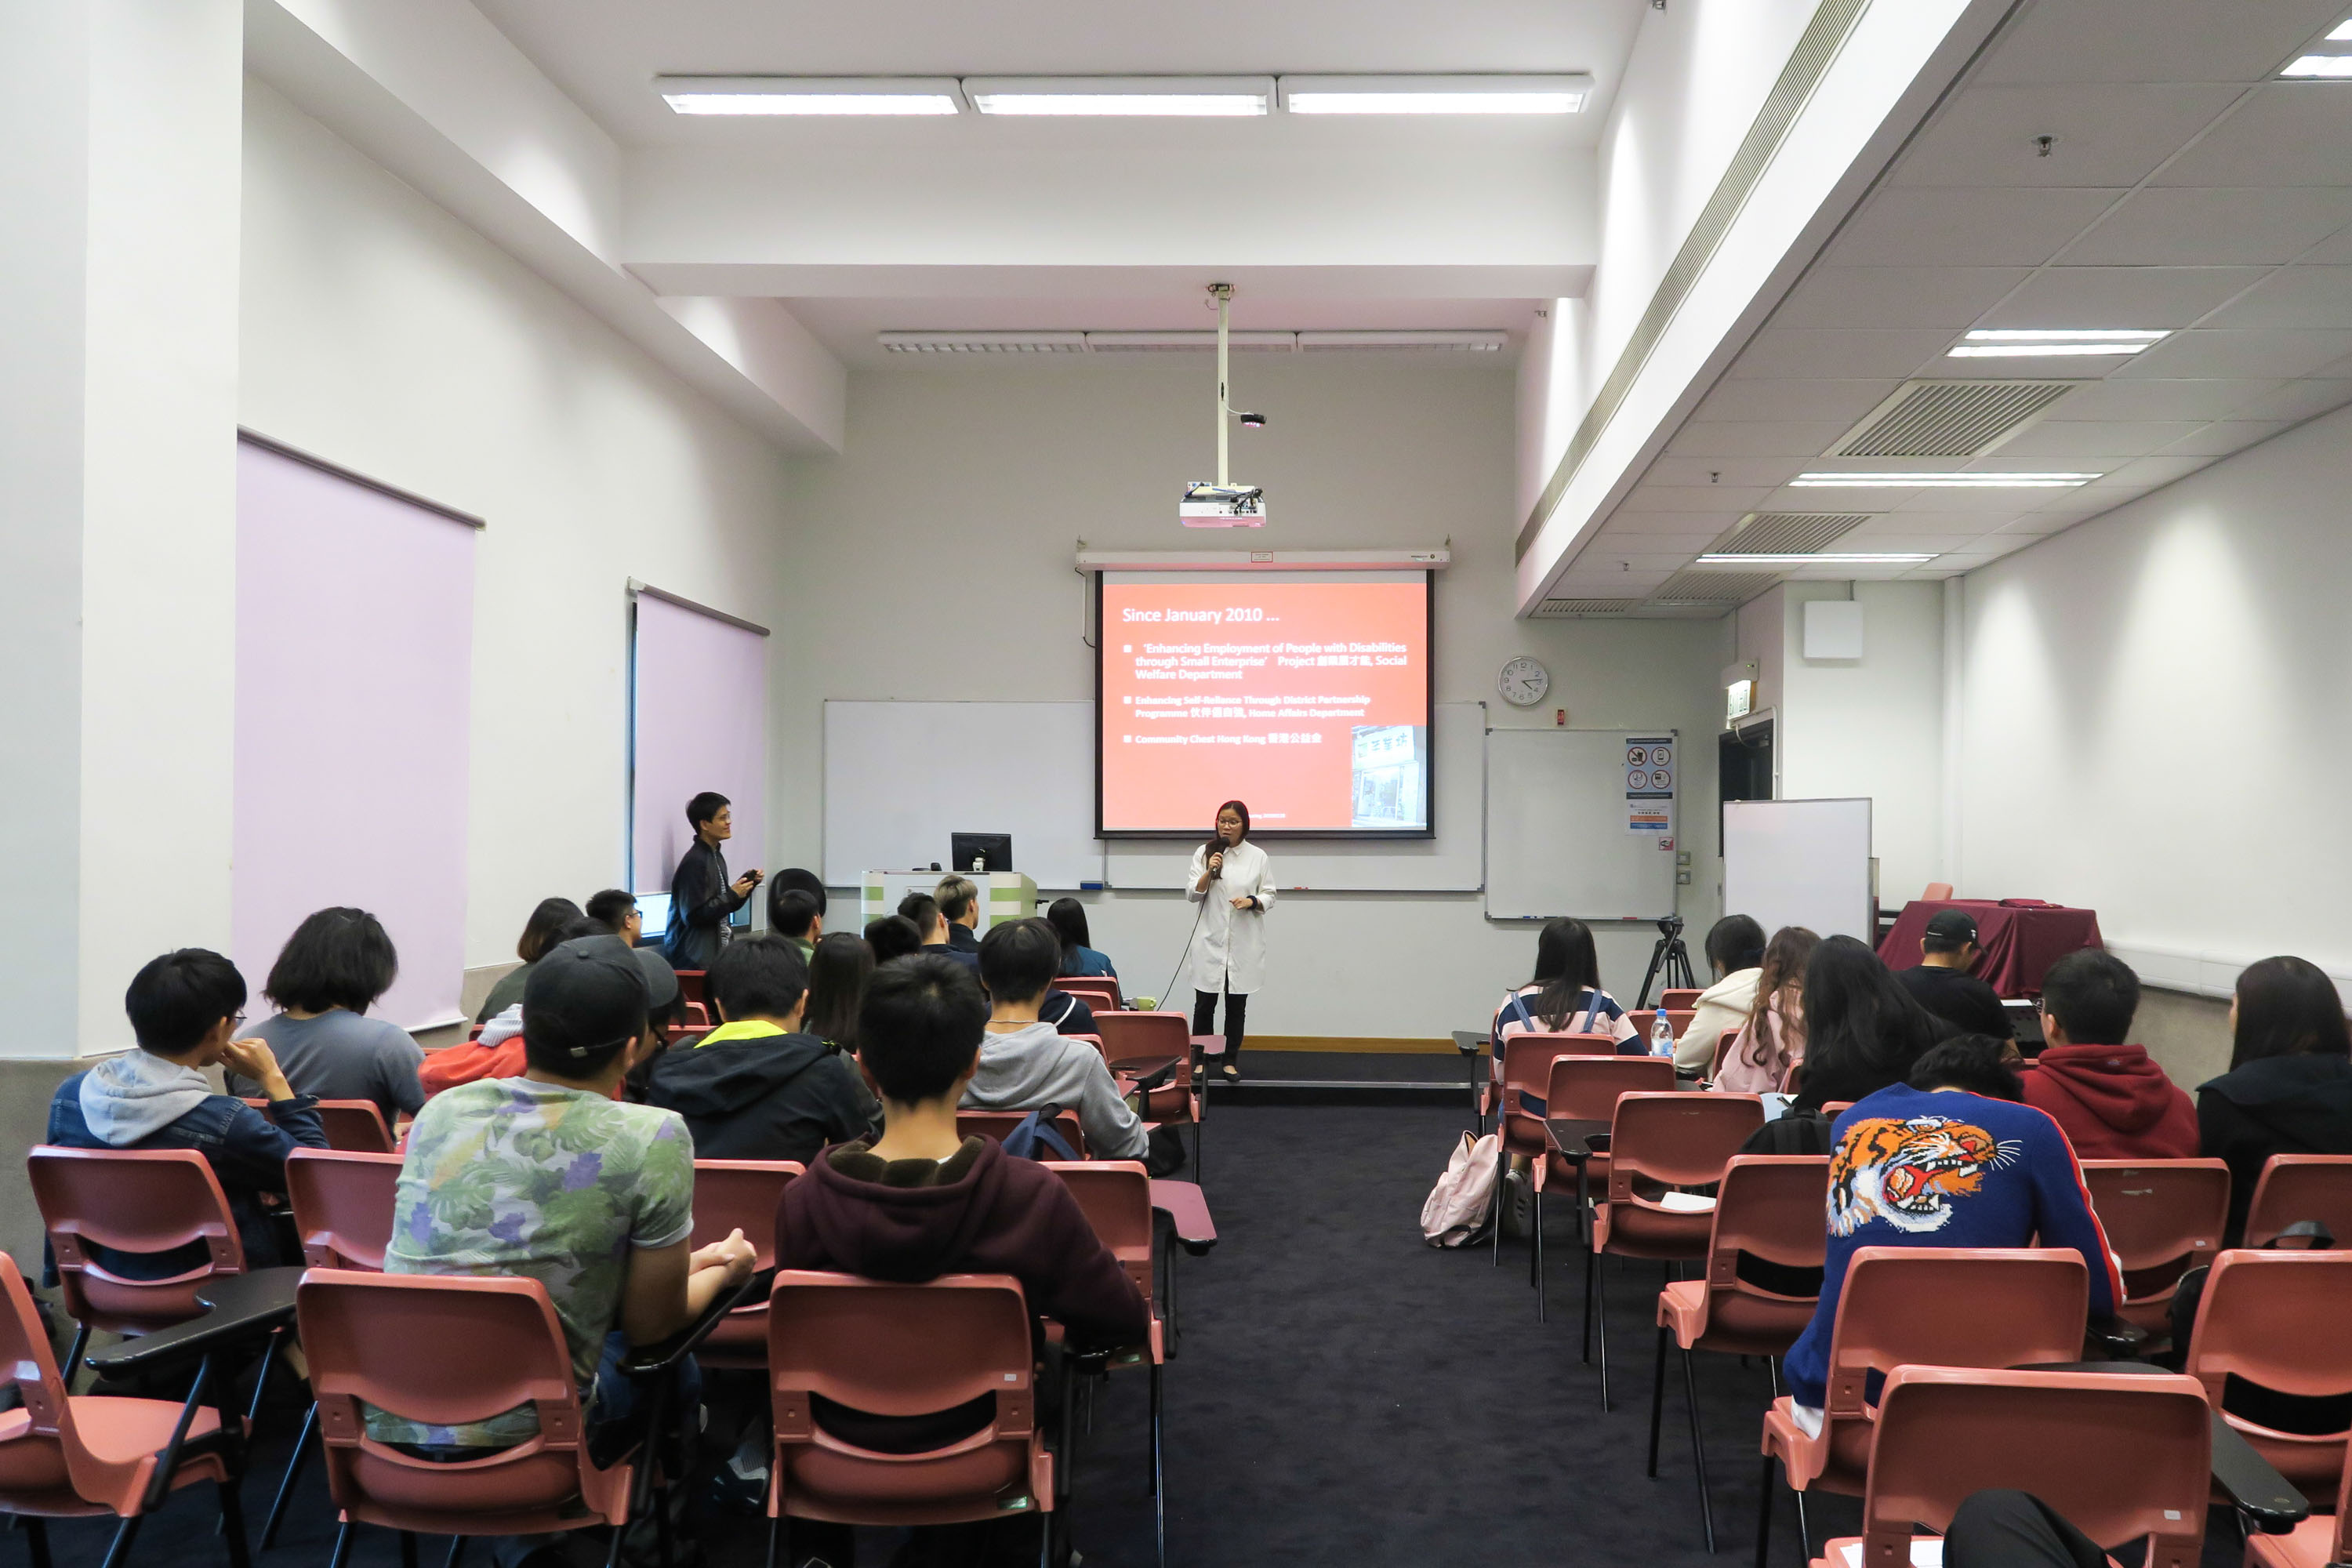 The talk develops students’ understanding and ability to participate in evaluation of social policies.   